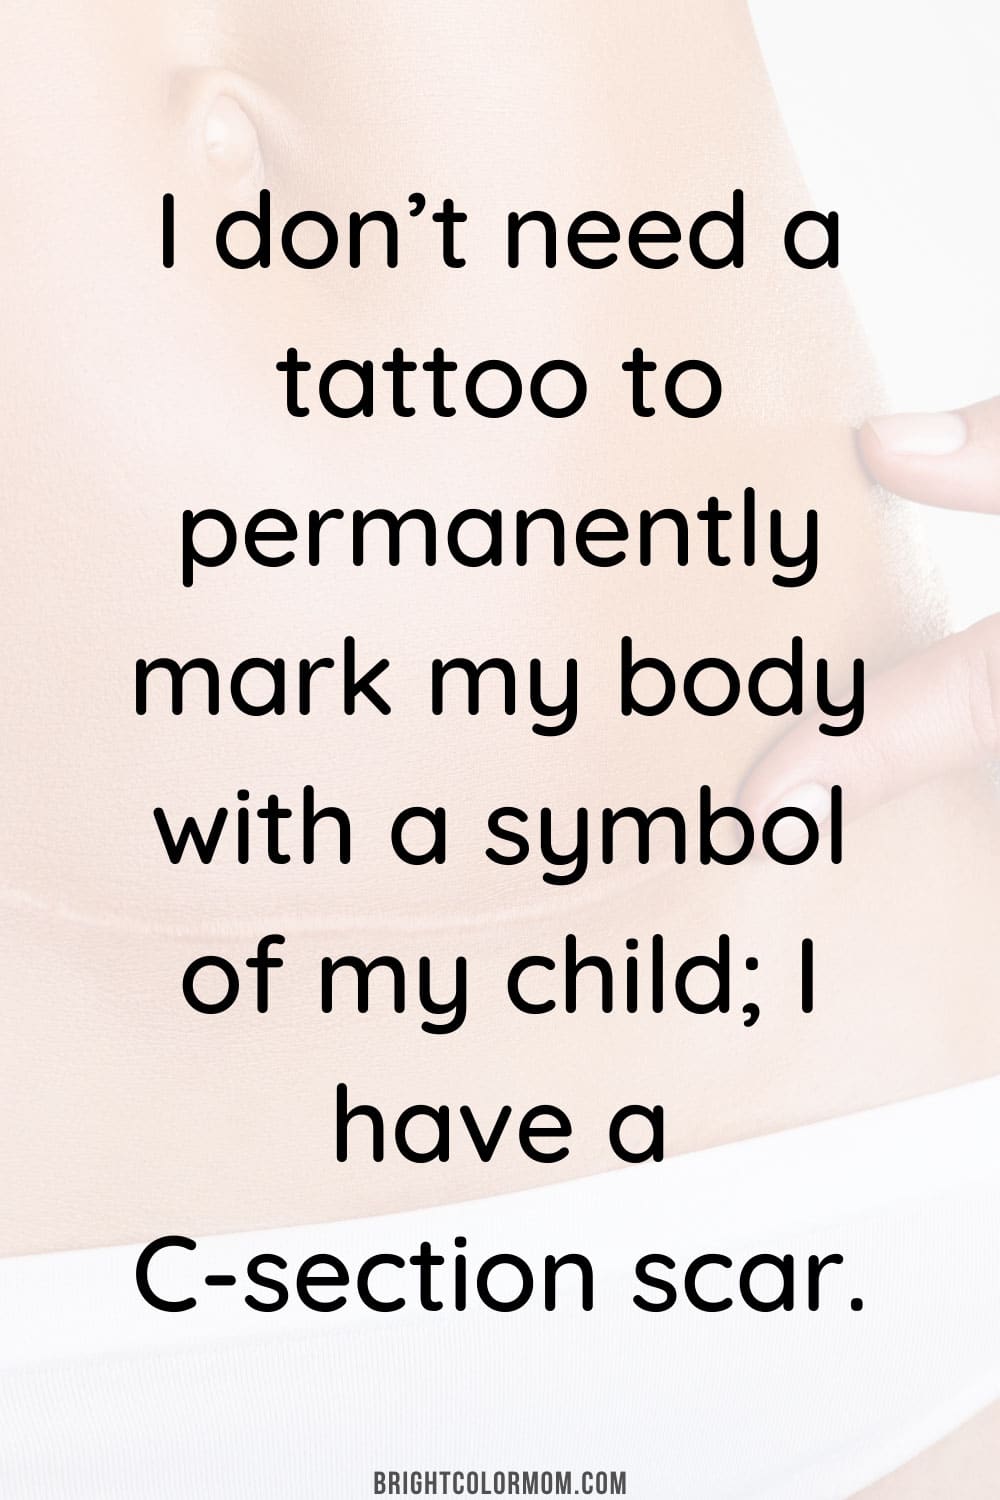 I don’t need a tattoo to permanently mark my body with a symbol of my child; I have a C-section scar.